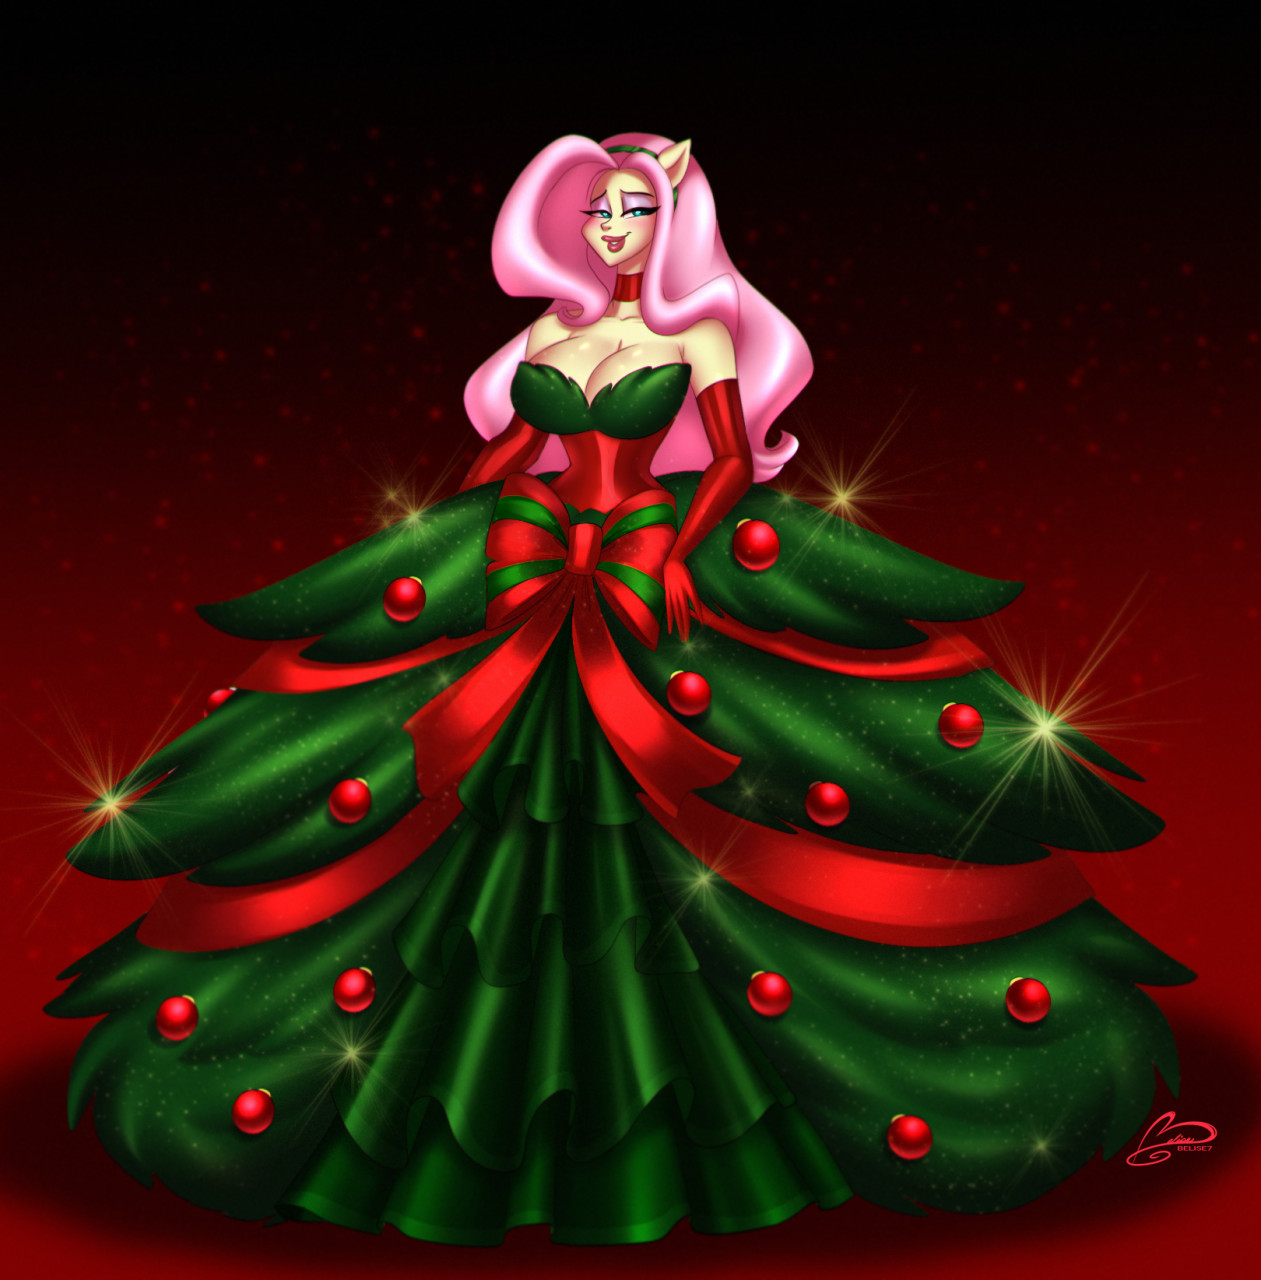 King Of Prussia Mall - Christmas Tree by Ashhei on DeviantArt